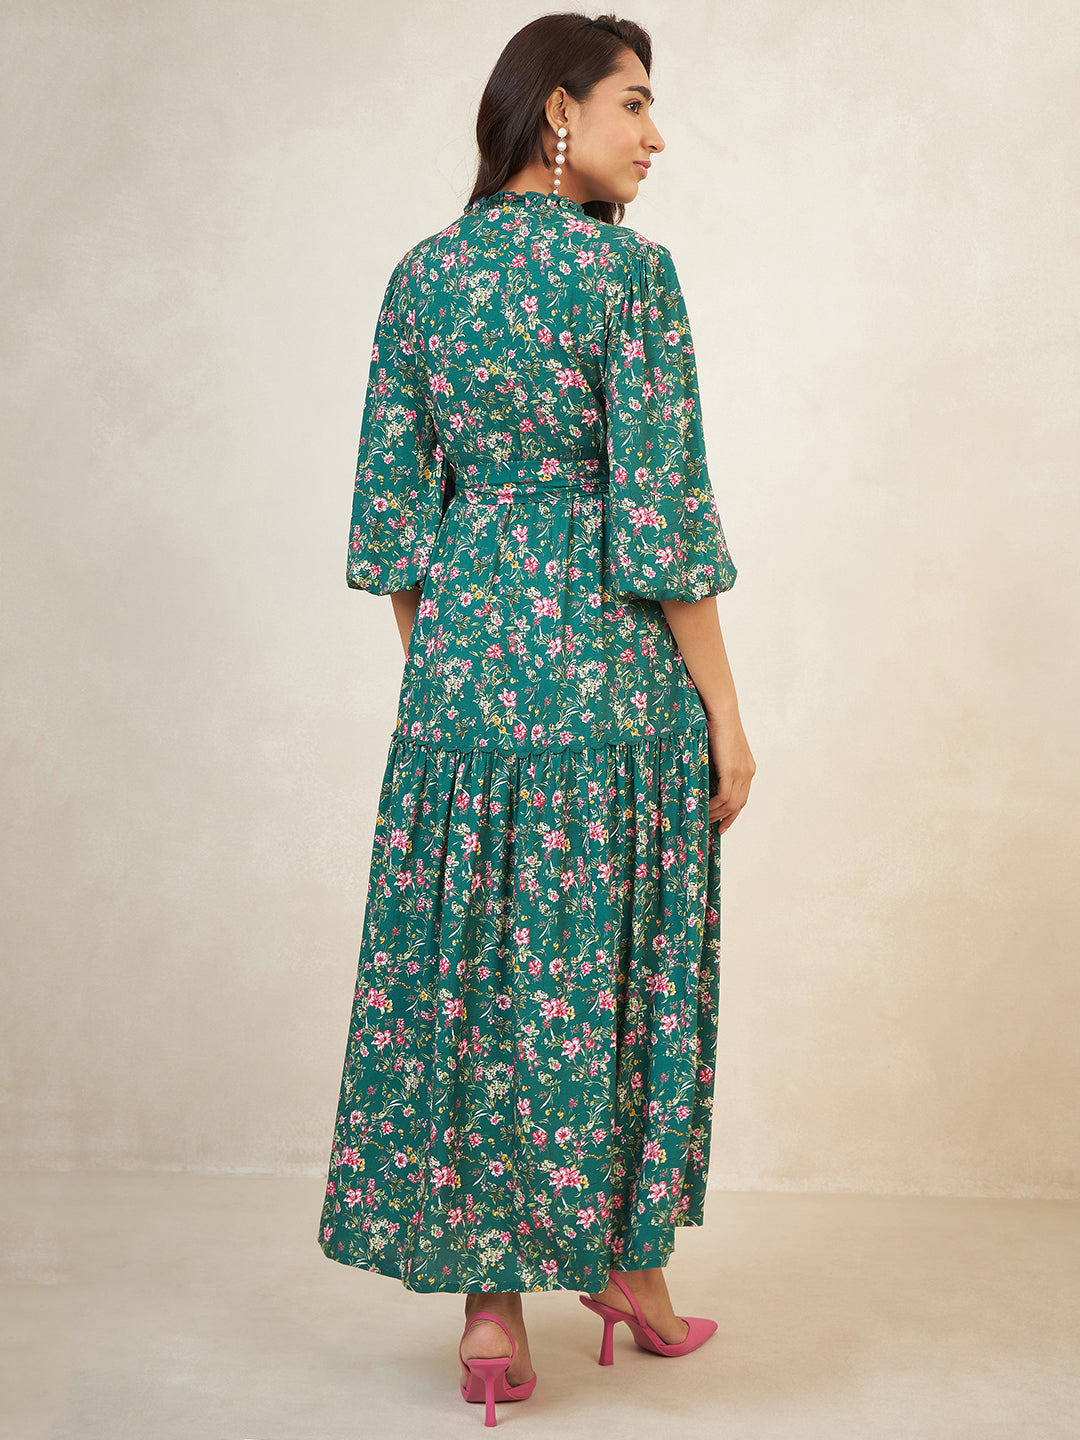 Green Floral Print With Scallop Trim Maxi Dress